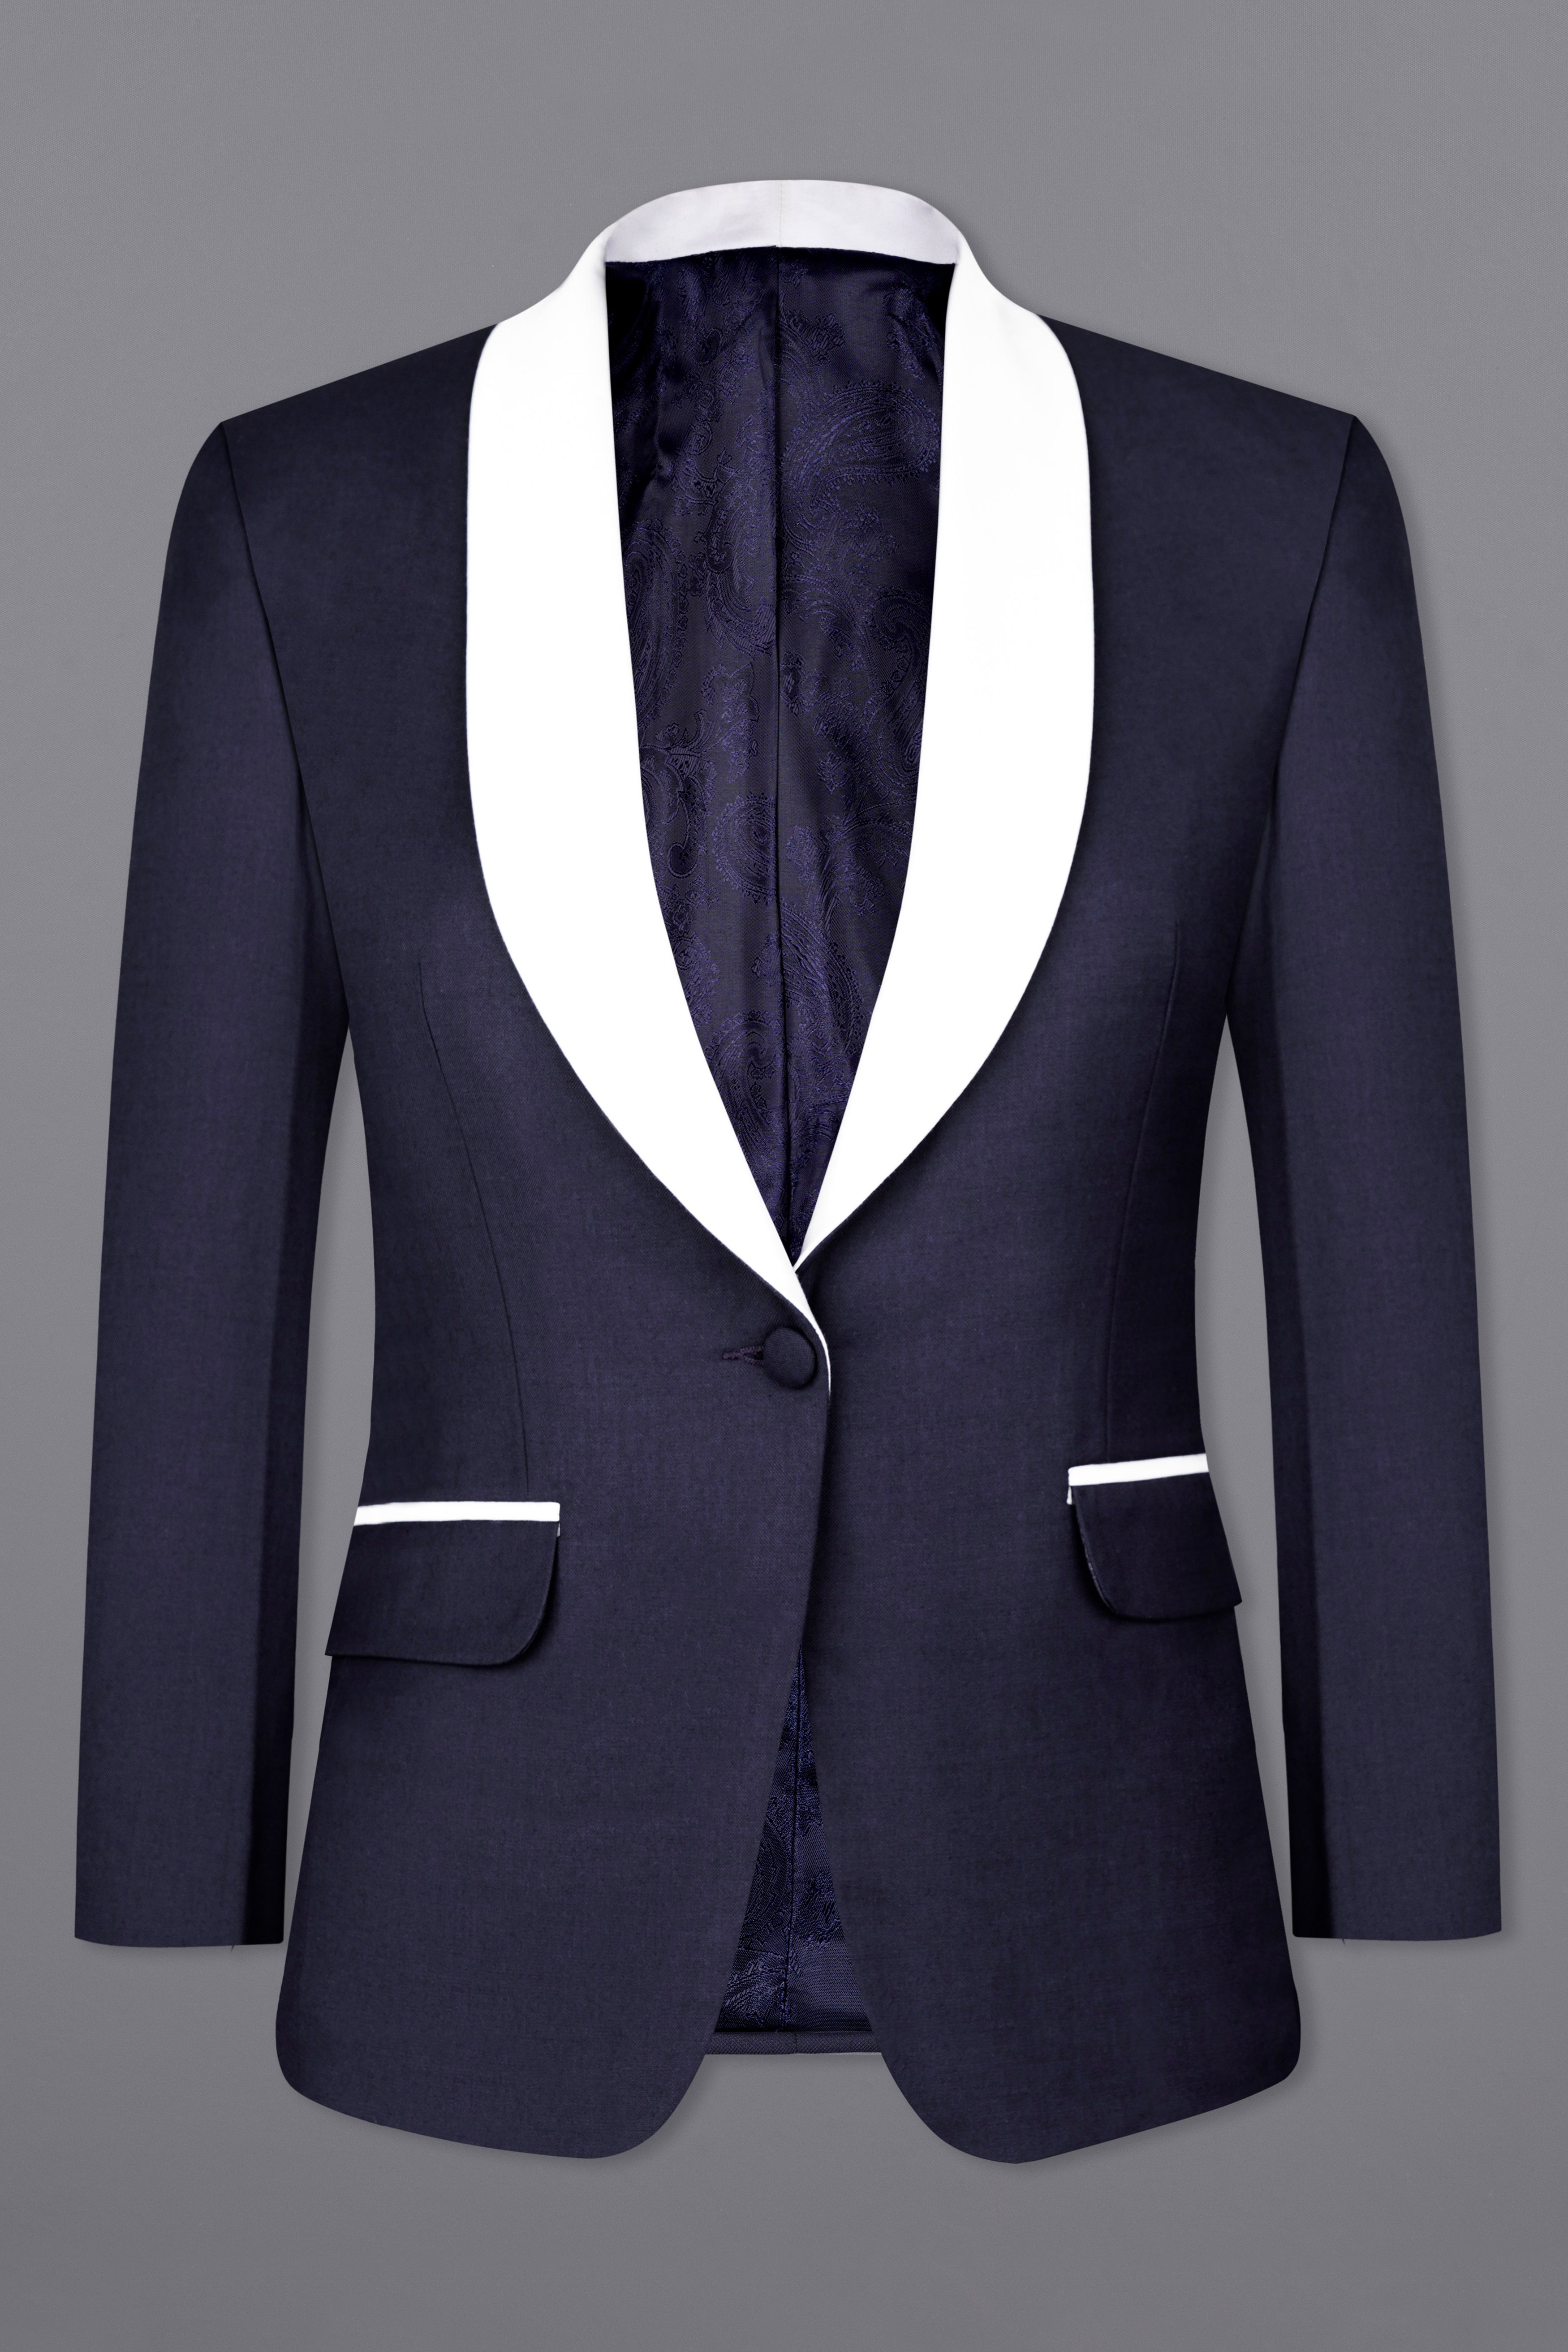 Charade Navy Blue Subtle Sheen with White Lapel Single Breasted Women's Suit